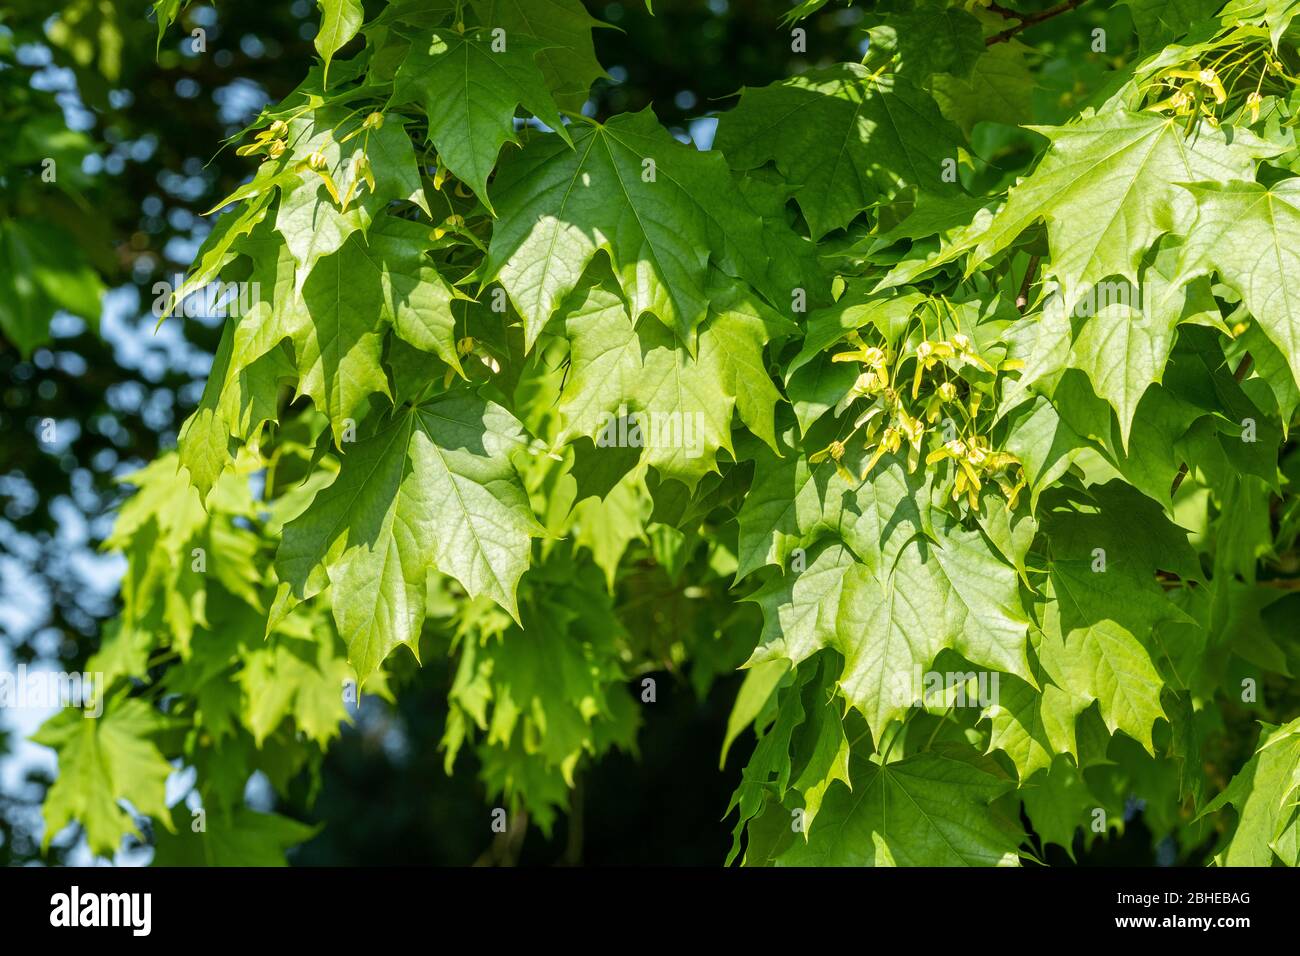 Norway maple tree (Acer platanoides) with winged seeds (samaras) in April, UK Stock Photo